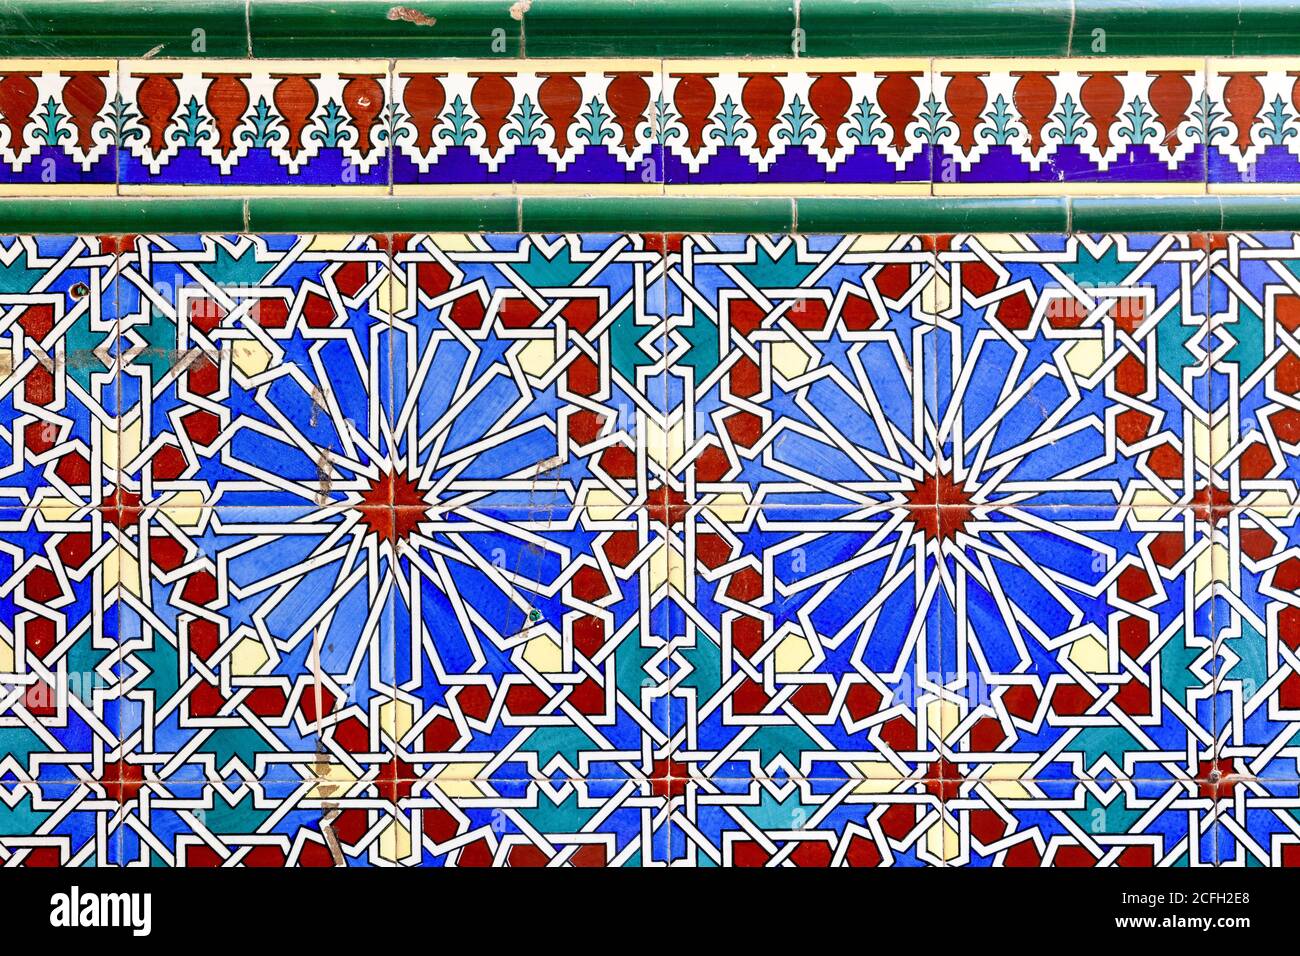 antique tiles found on wall in europe. Spanish tiles in Cartegena Stock Photo